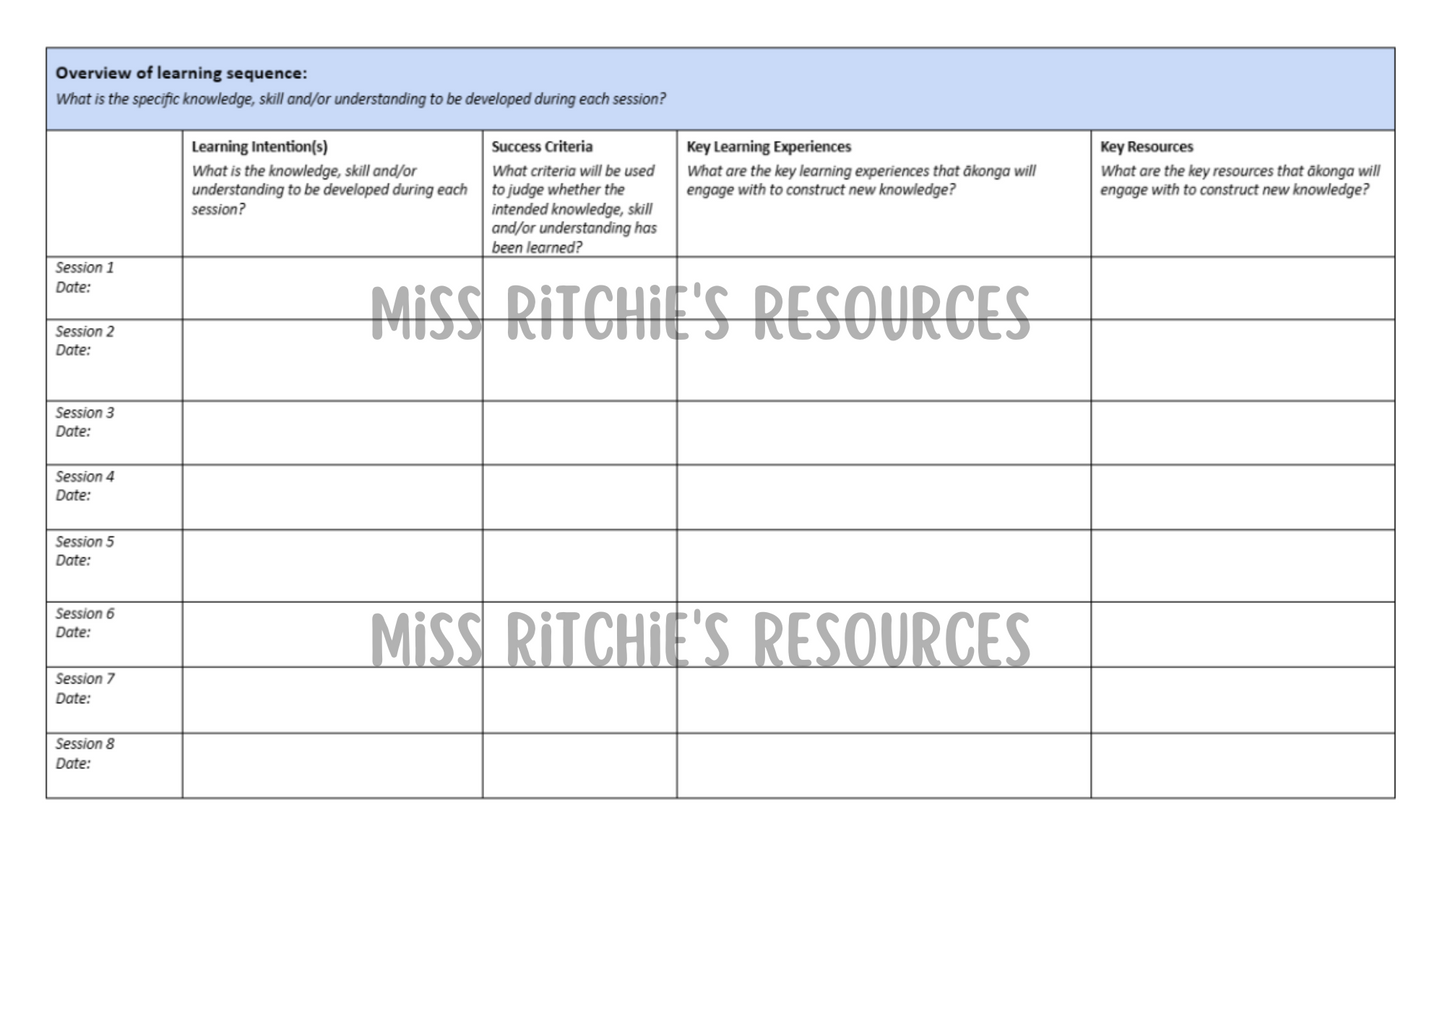 Weekly/unit planning. Adaptable to your own needs. Sets a high standard for teaching and learning.